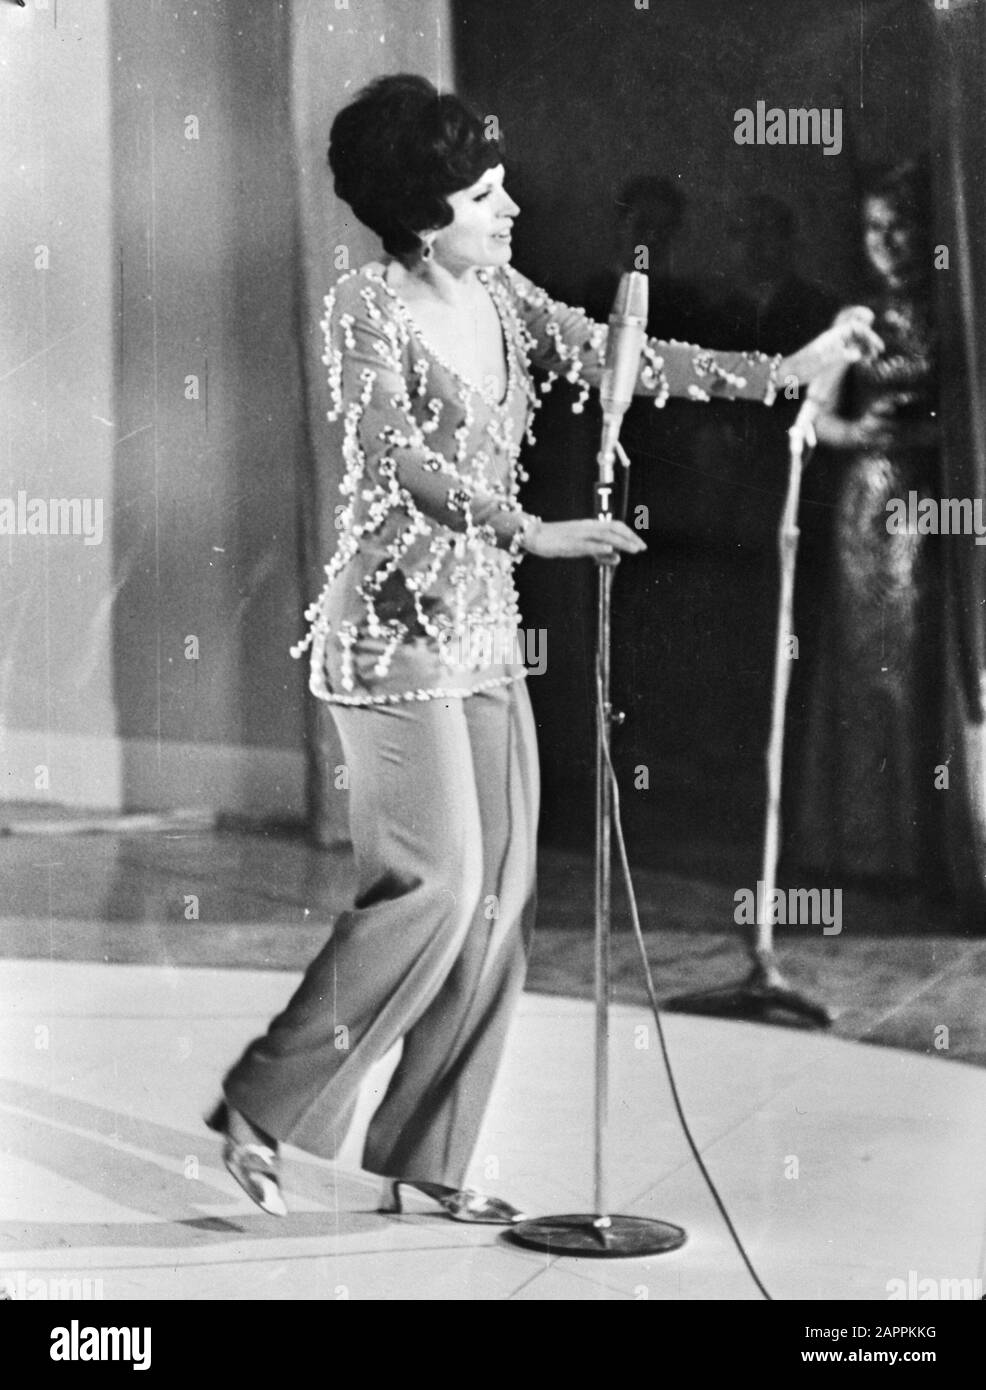 Popsinger Salome will represent Spain at Euro Song Contest in Madrid Date: March 5, 1969 Location: Madrid Keywords: SONG FESTIVES, Singers Person name: salome Stock Photo